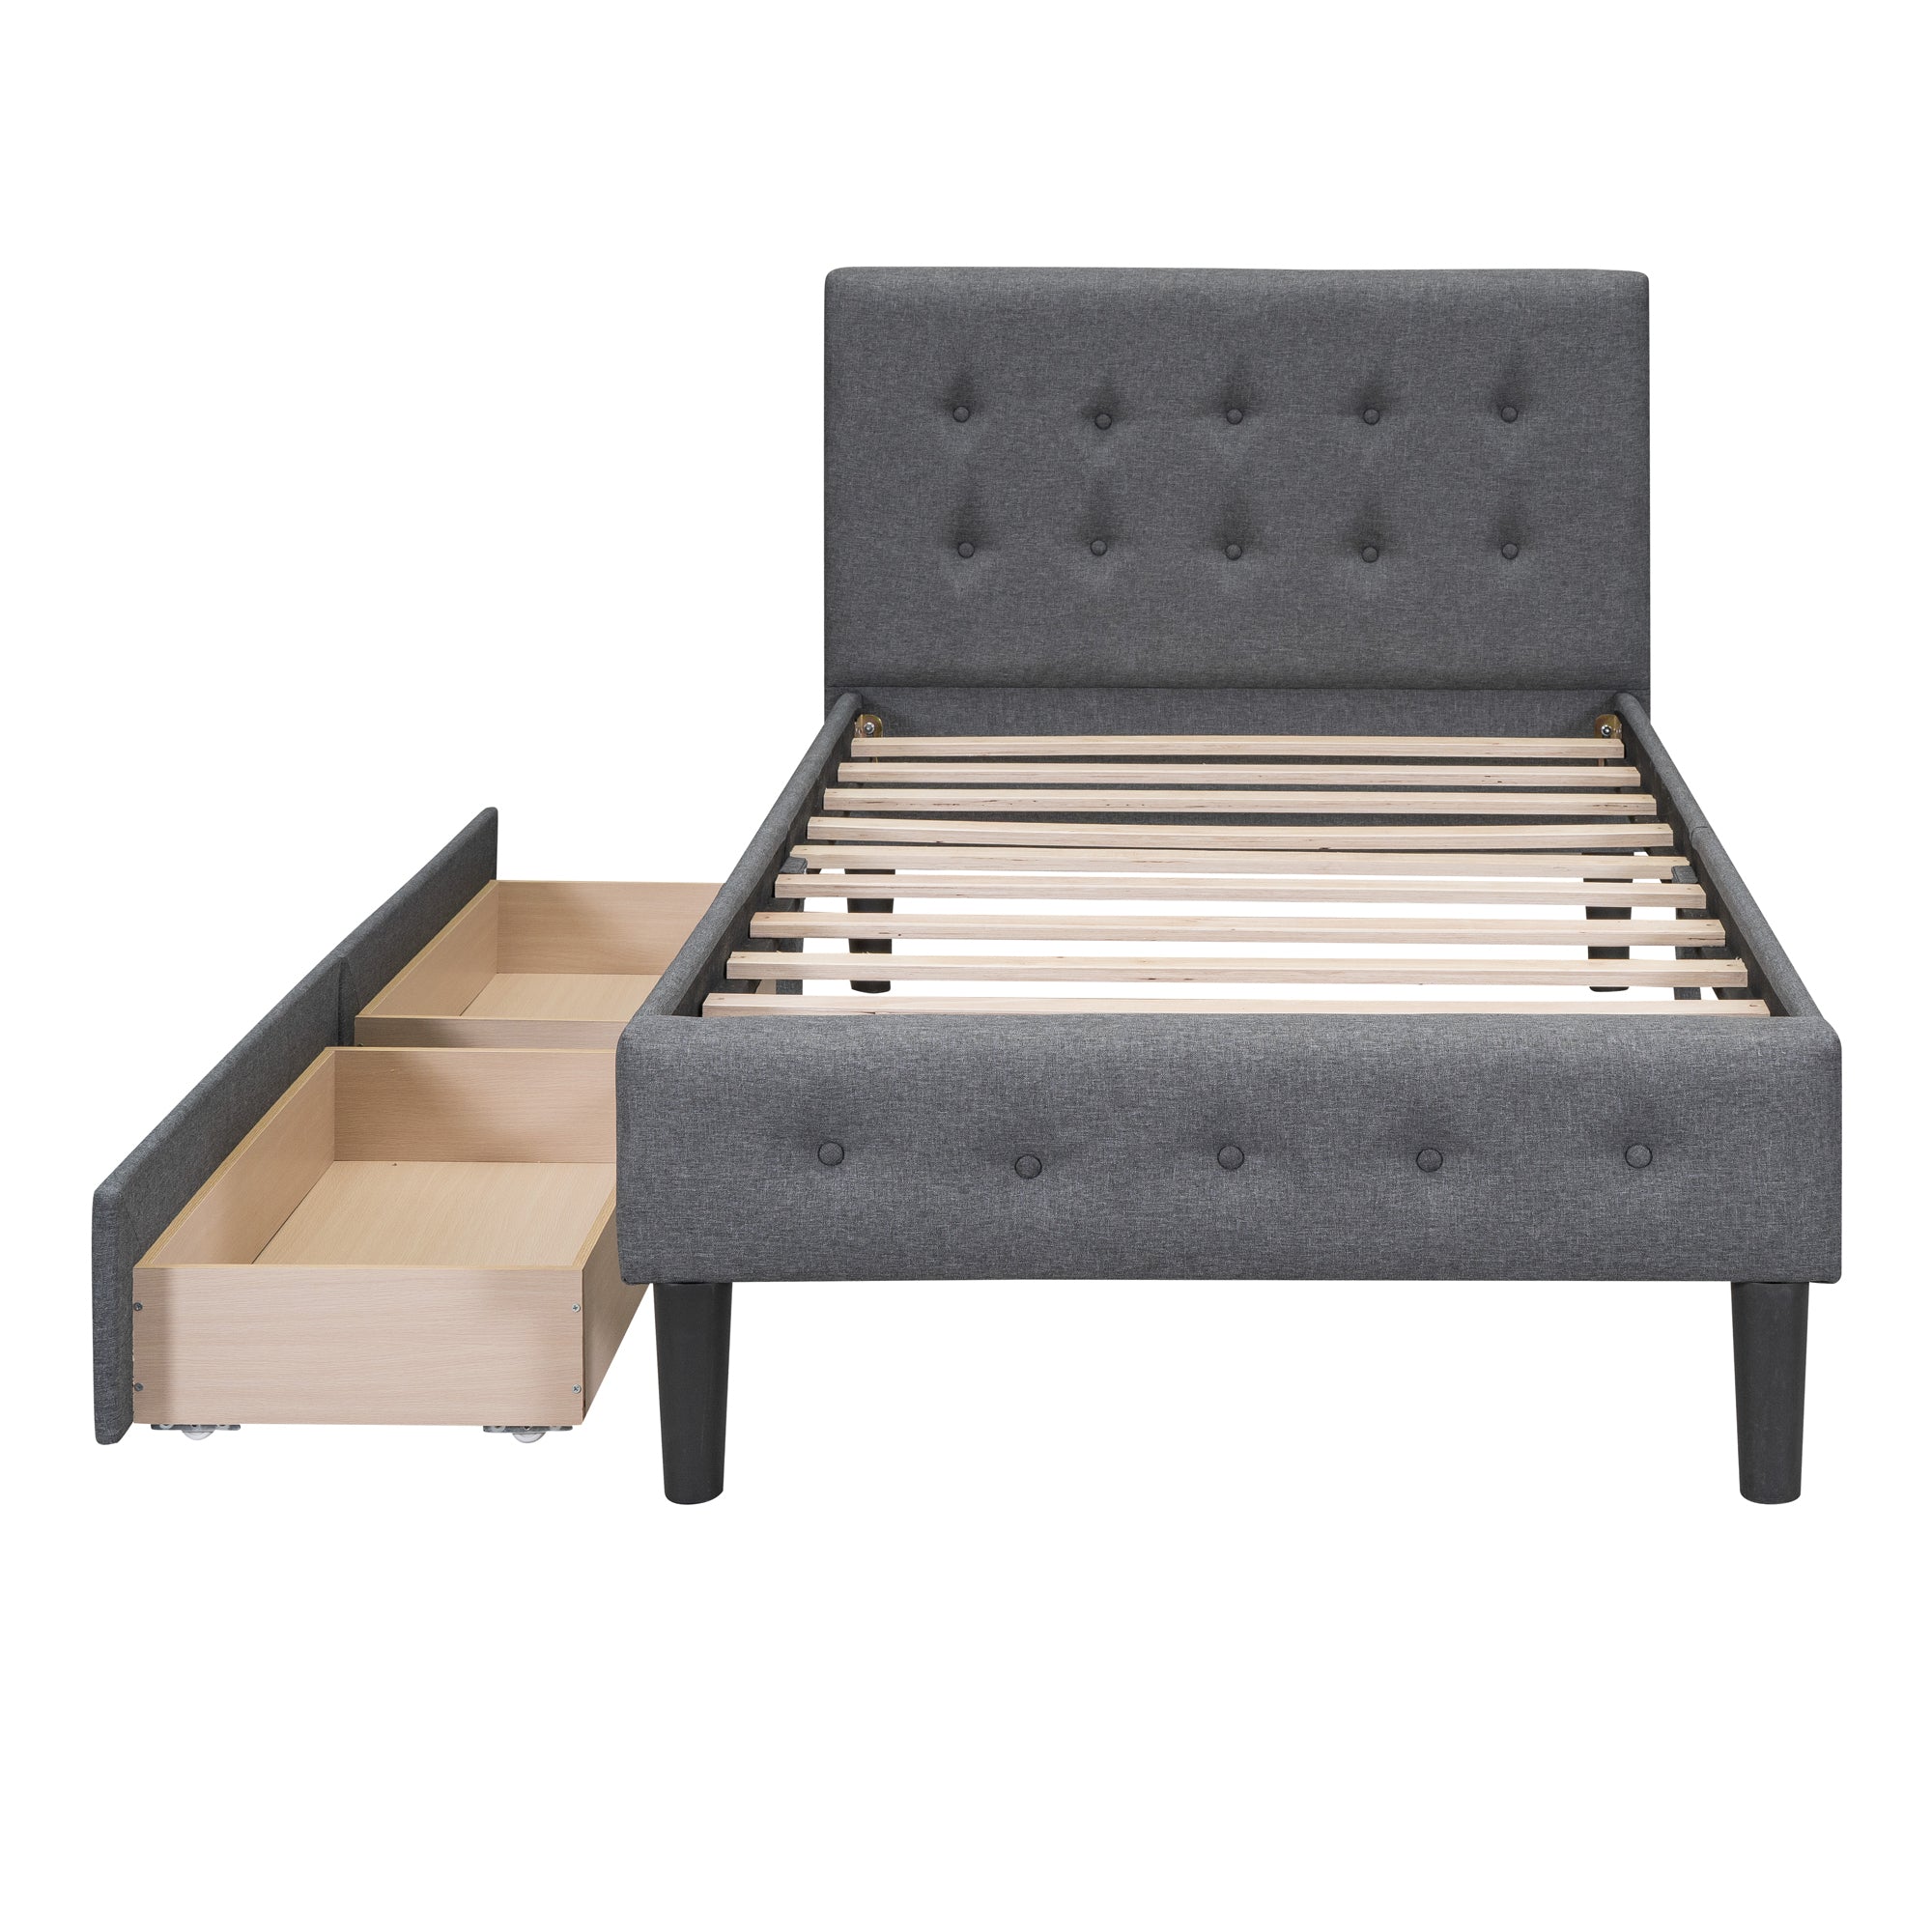 Twin Size Upholstered Platform Bed with 2 Drawers, gray-upholstered